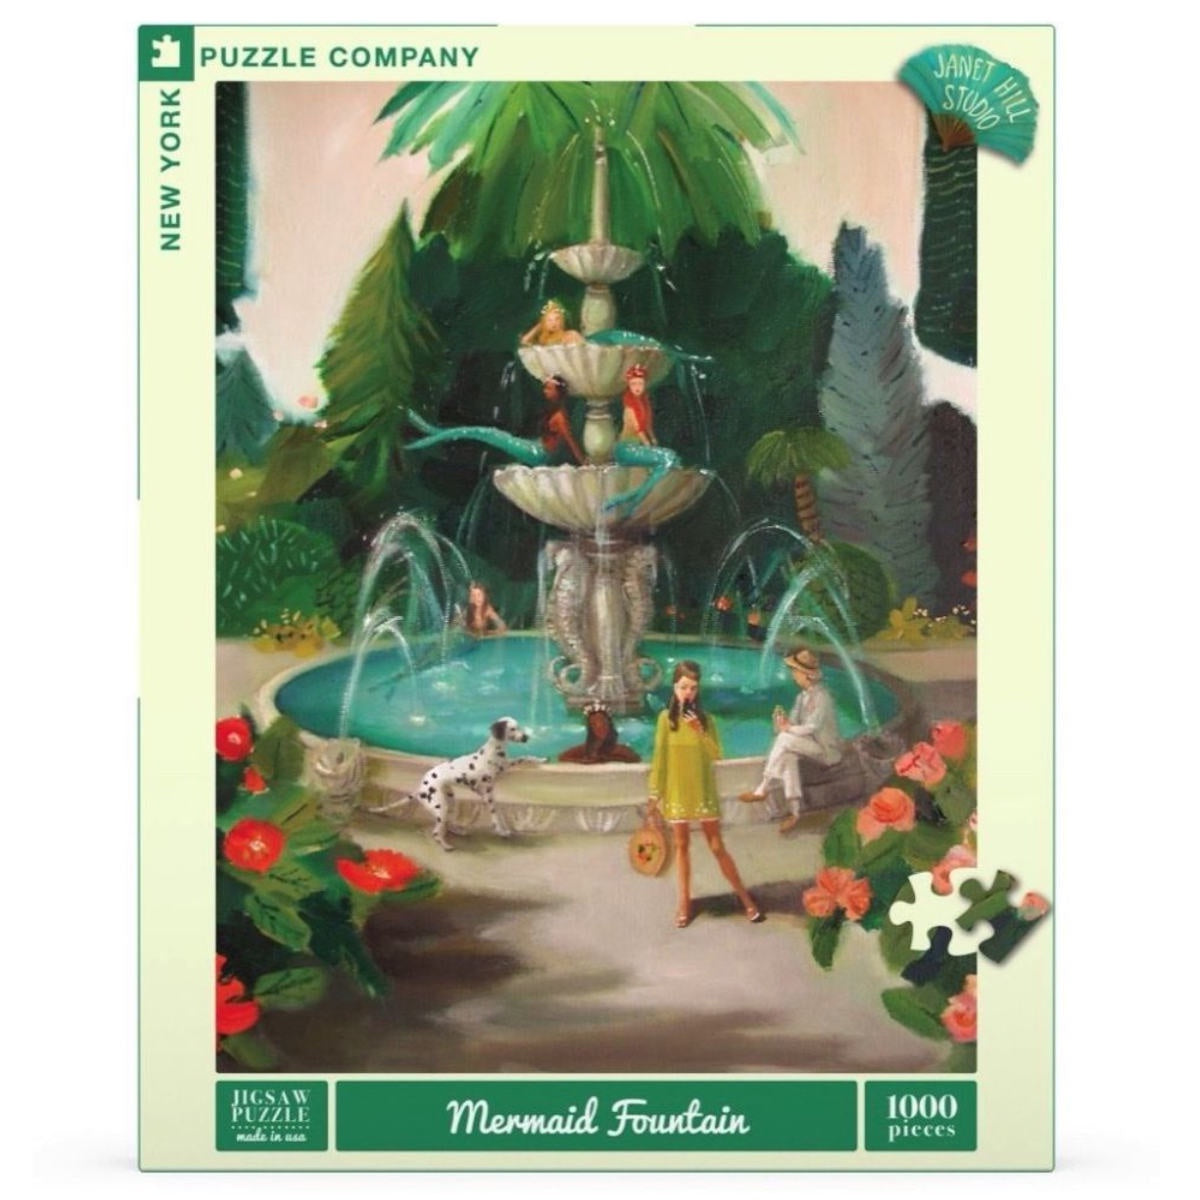 New Yorker 1000 Piece Puzzle - Mermaid Fountain